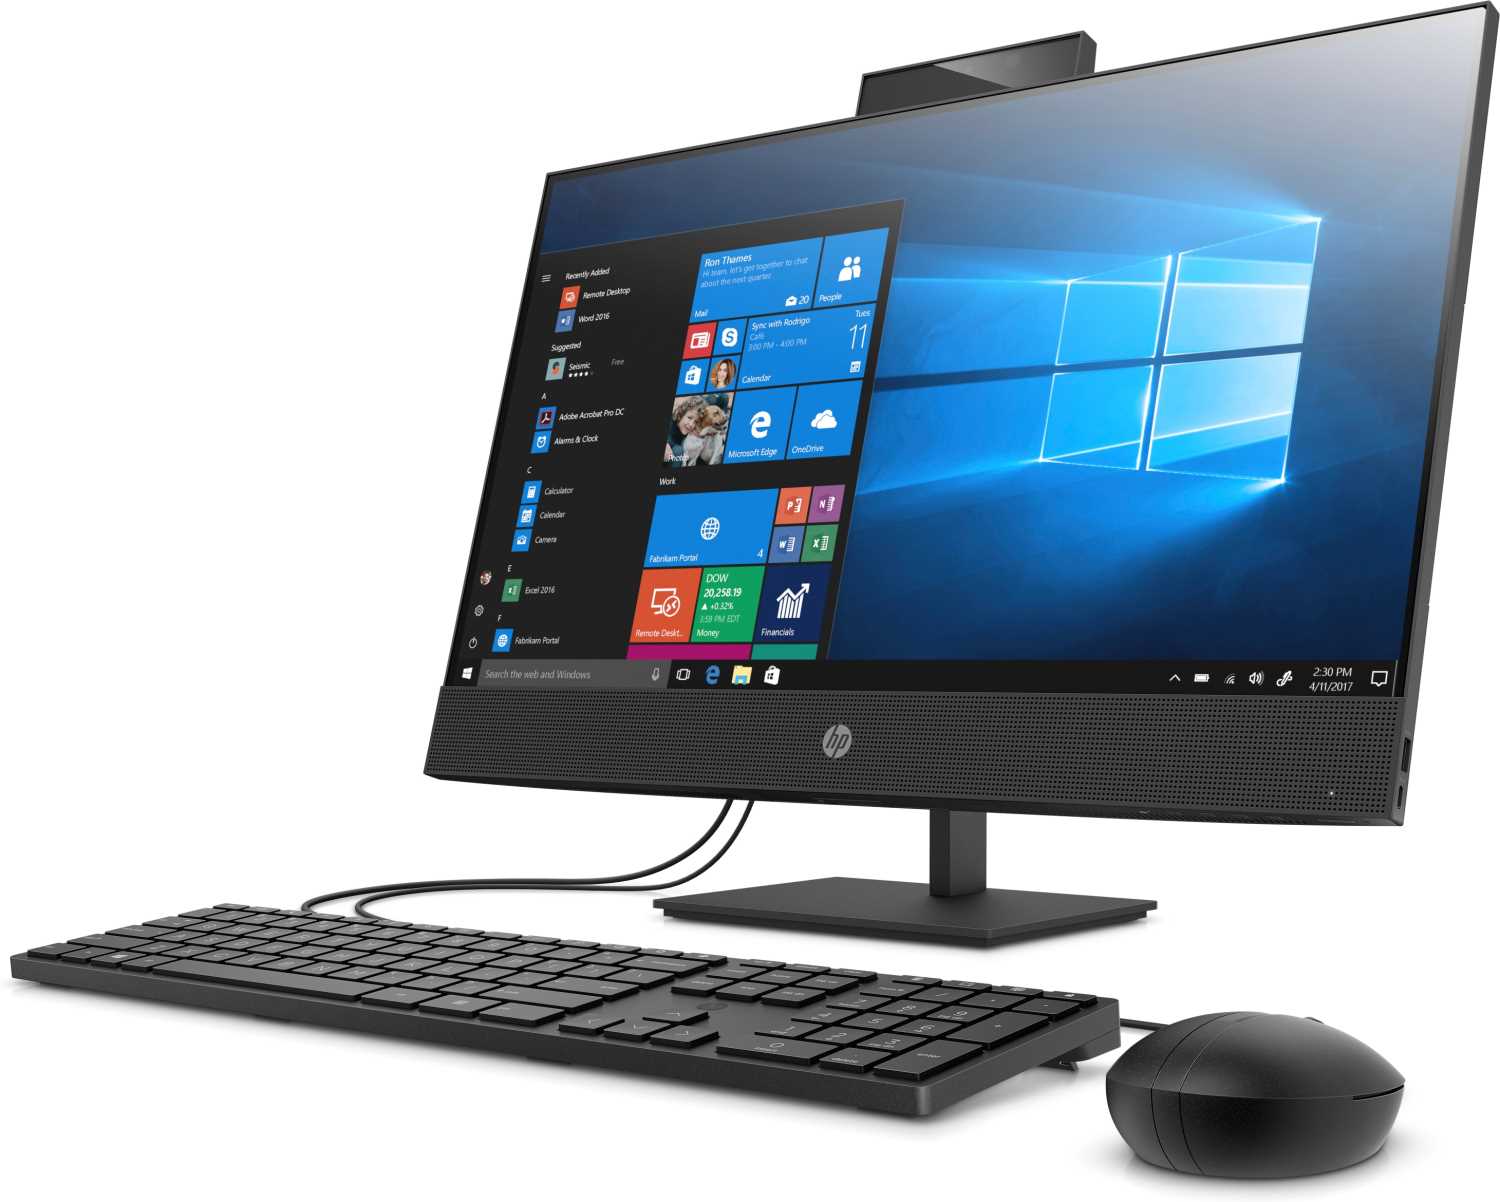 HP ProOne 440 Non-Touch AiO Desktop PC 400 G6 24 inch / NT / i5-10500T / 8GB / 1TB HDD / W10p64 / DVD-Writer / 1yw / USB 320K kbd / mouseUSB / Fixed Stand / MCR / Speakers  LBL TCO / Intel Wi-Fi 6 / HDMI Port / Webcam / Sea and Rail